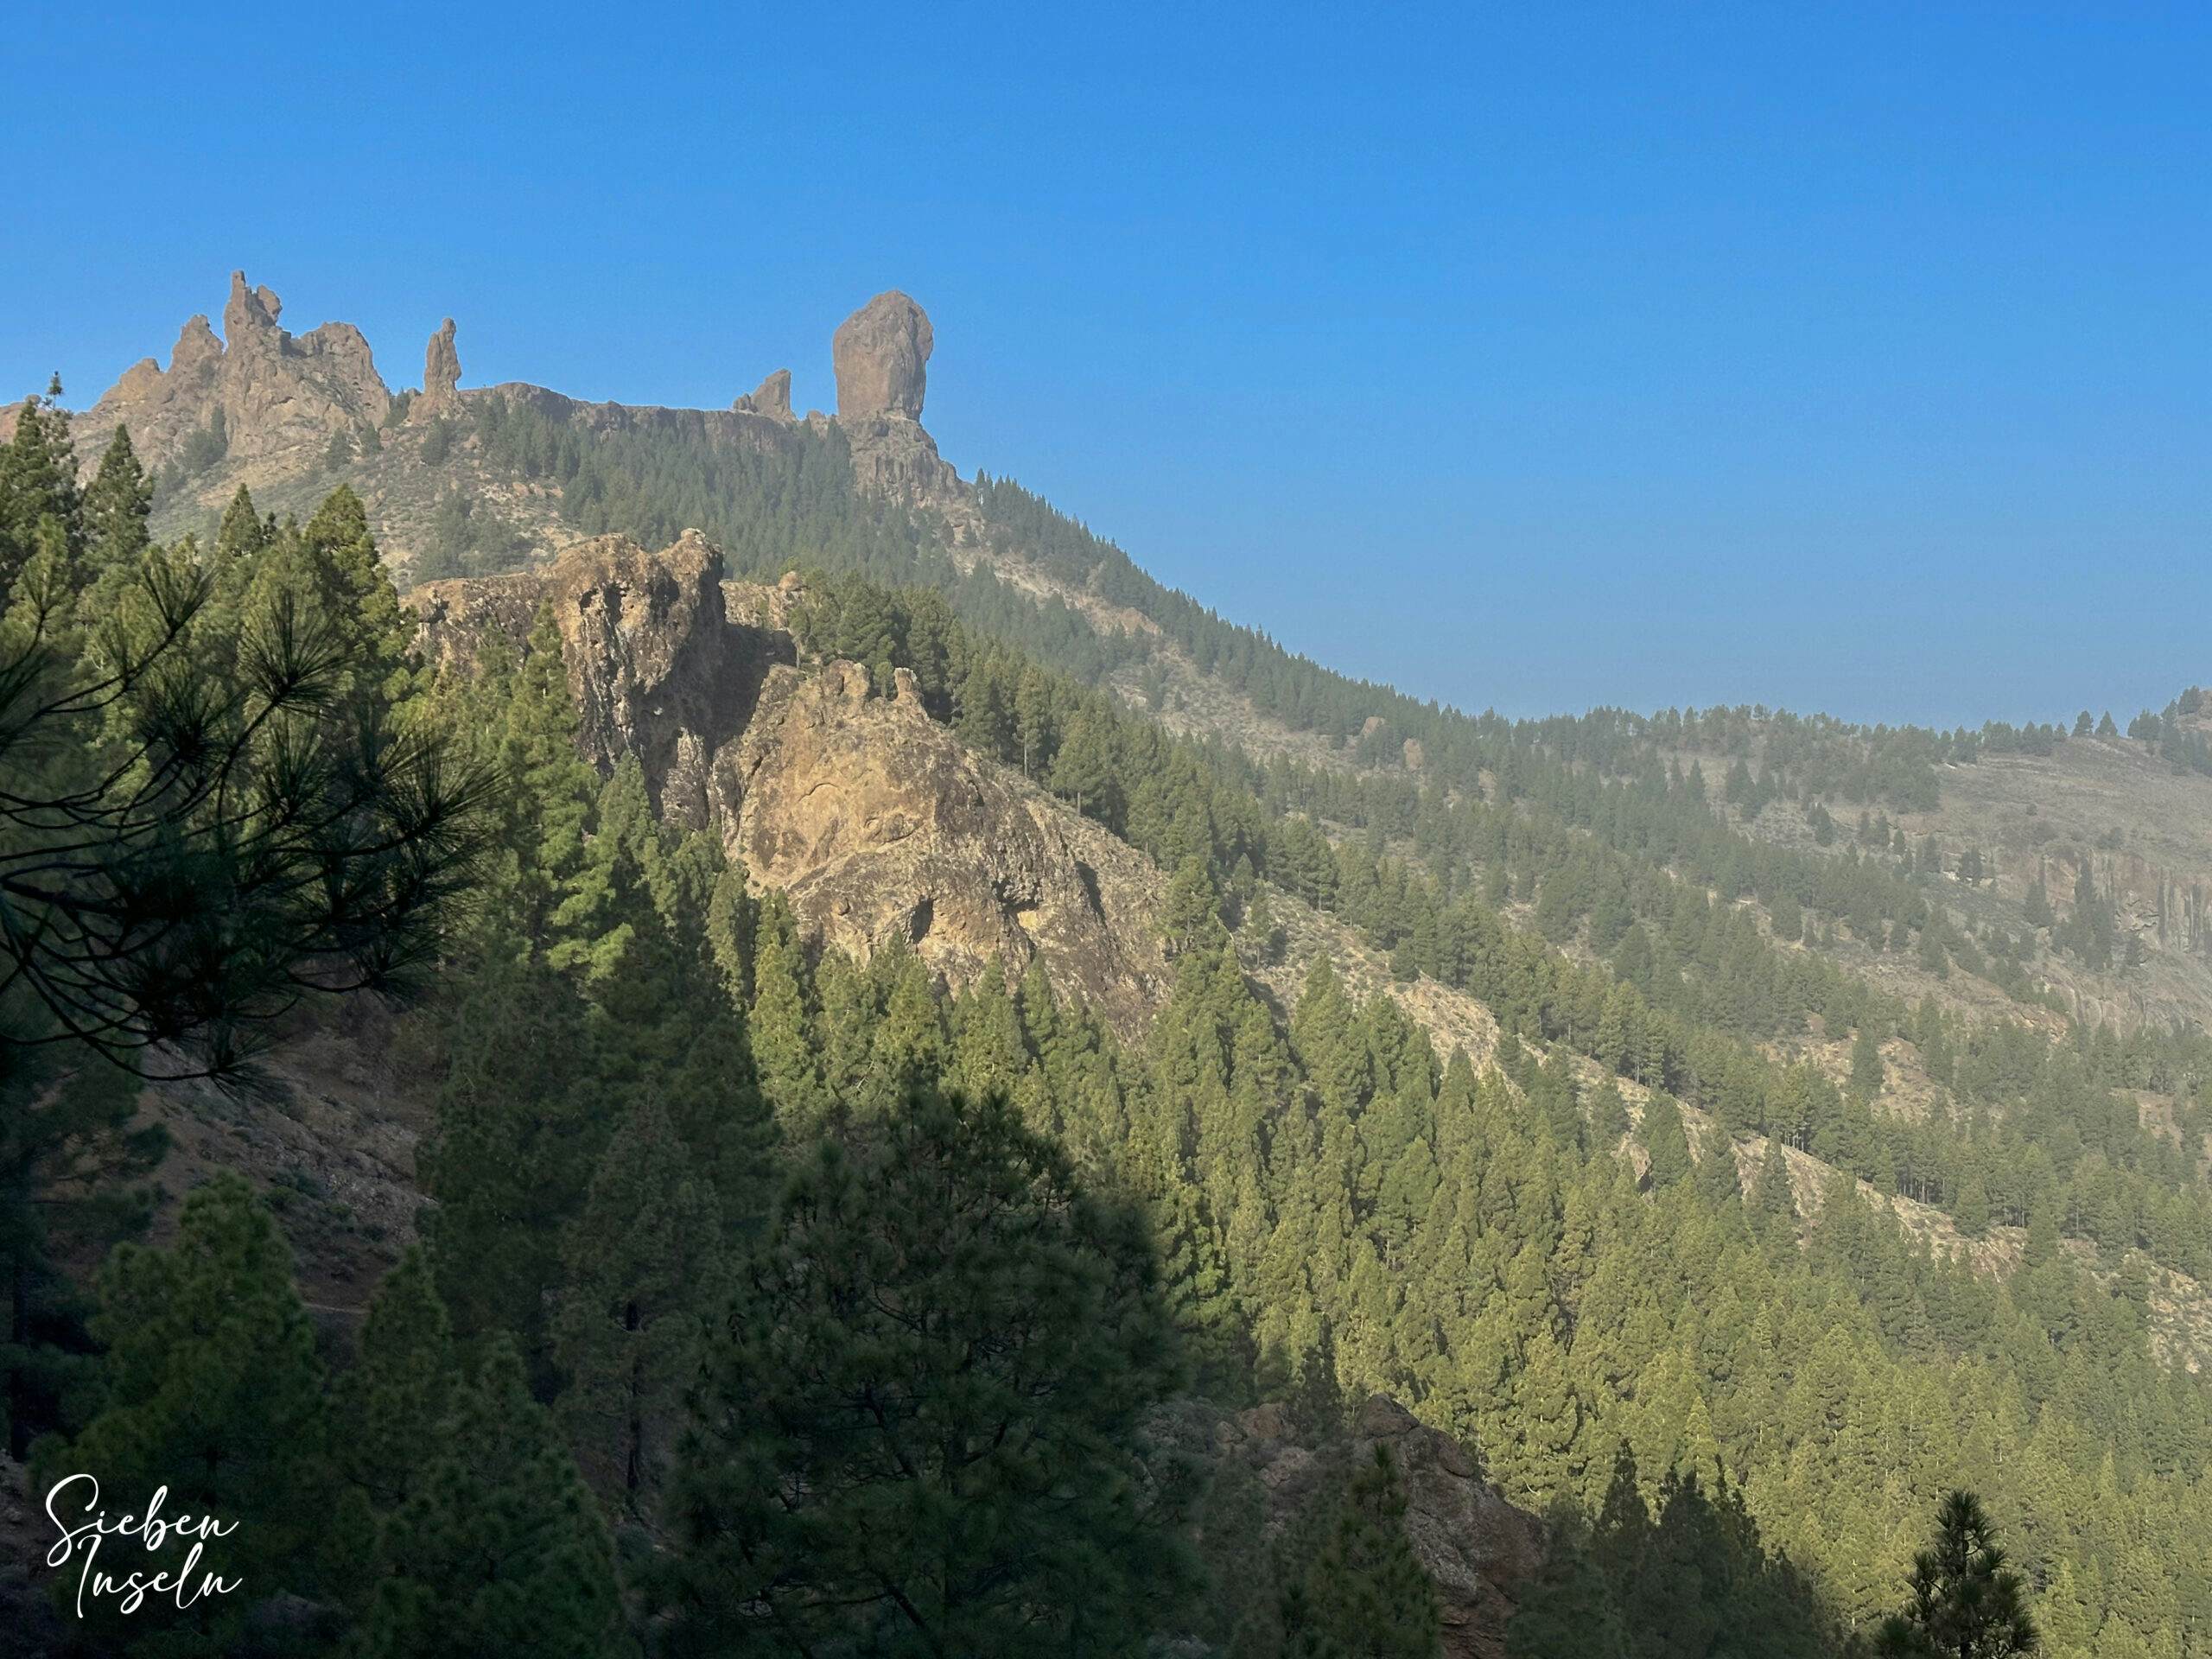 The Roque Nublo seen from the hiking trail towards La Culata